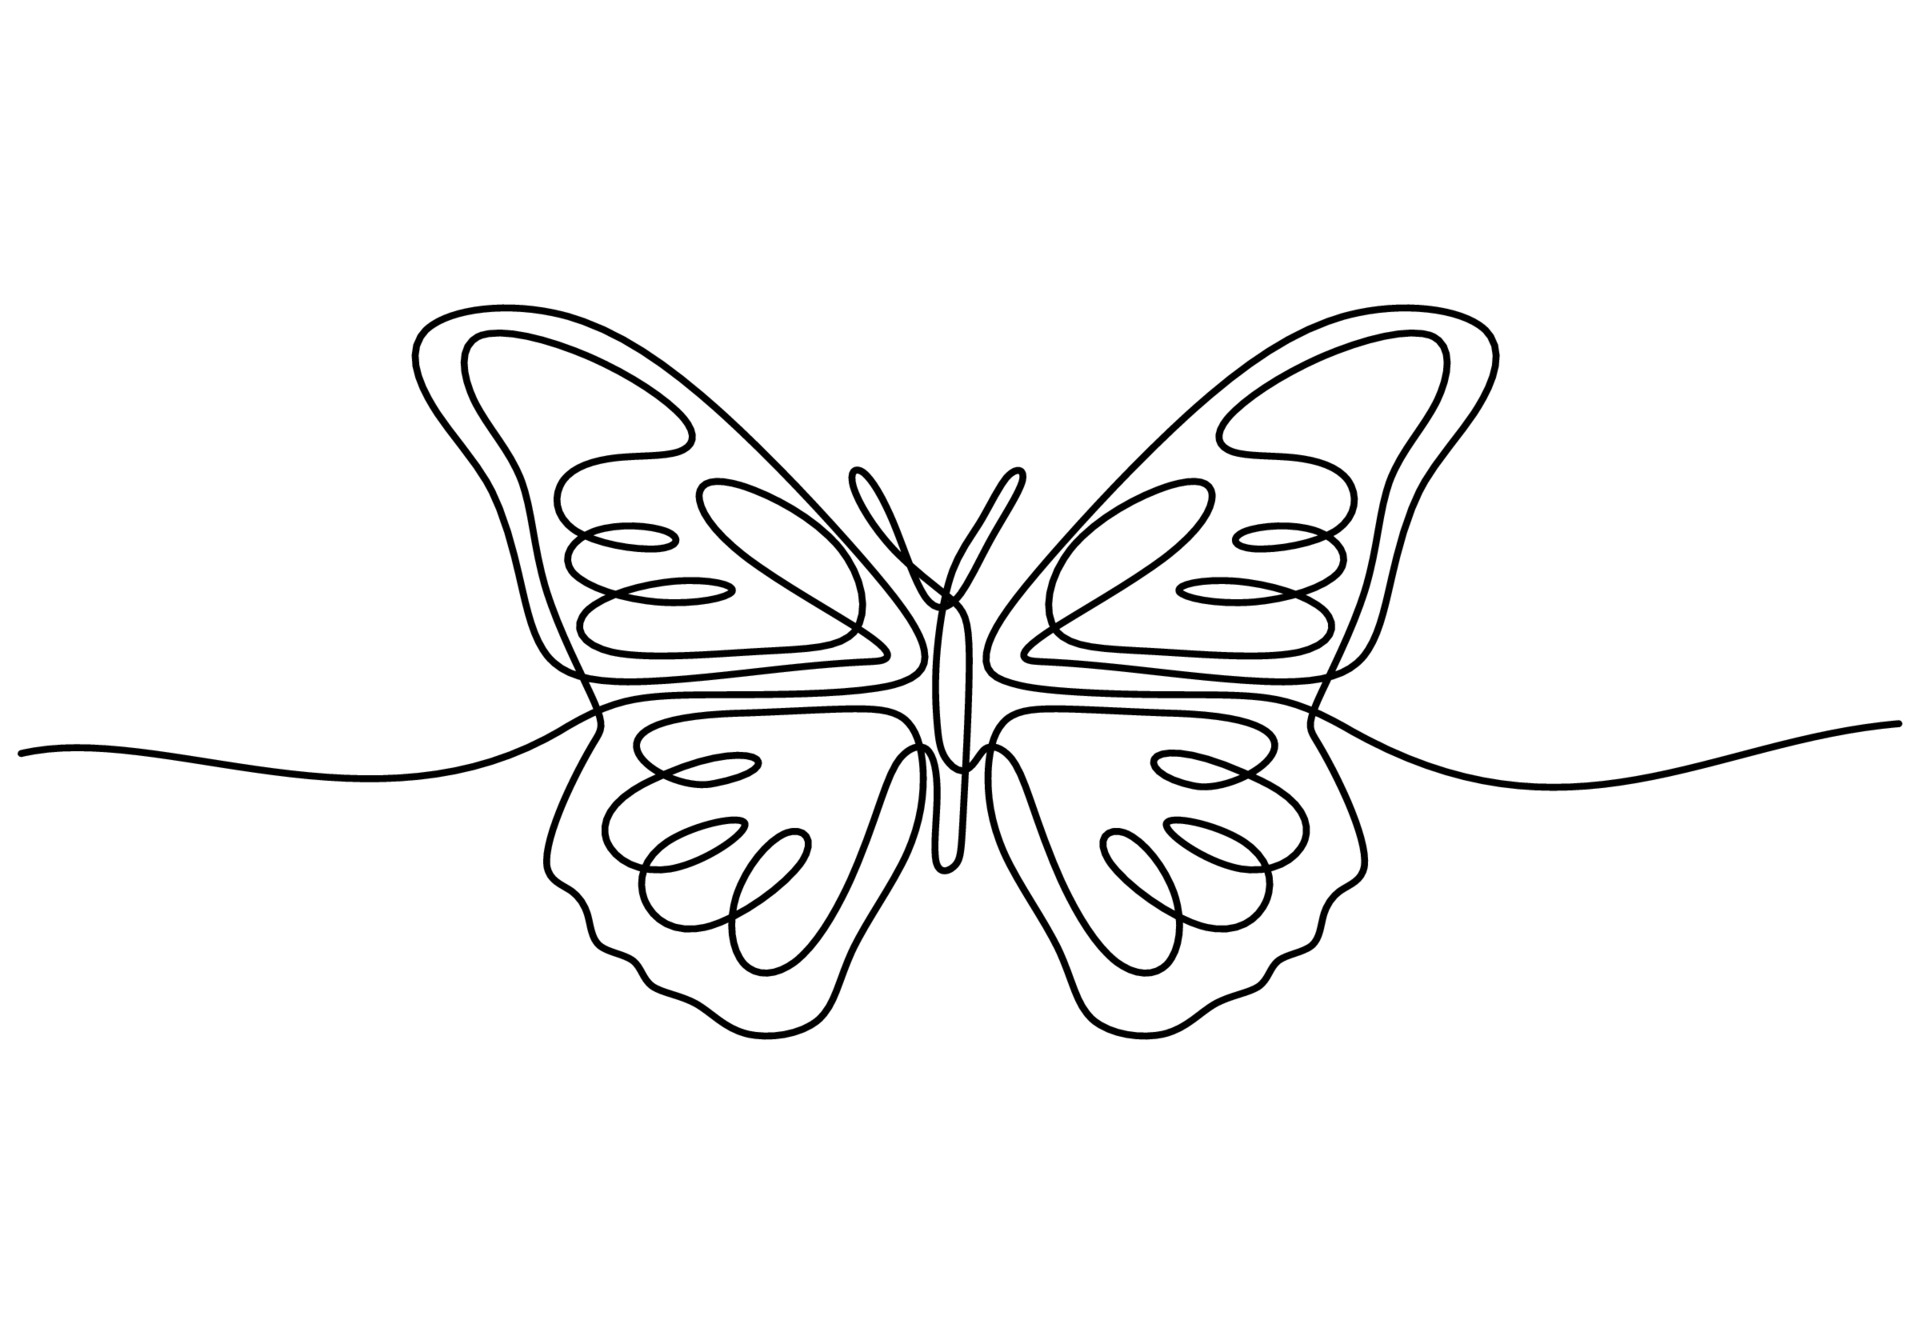 An Easy Tutorial On How To Draw A Butterfly - Caribu | Playtime Is Calling